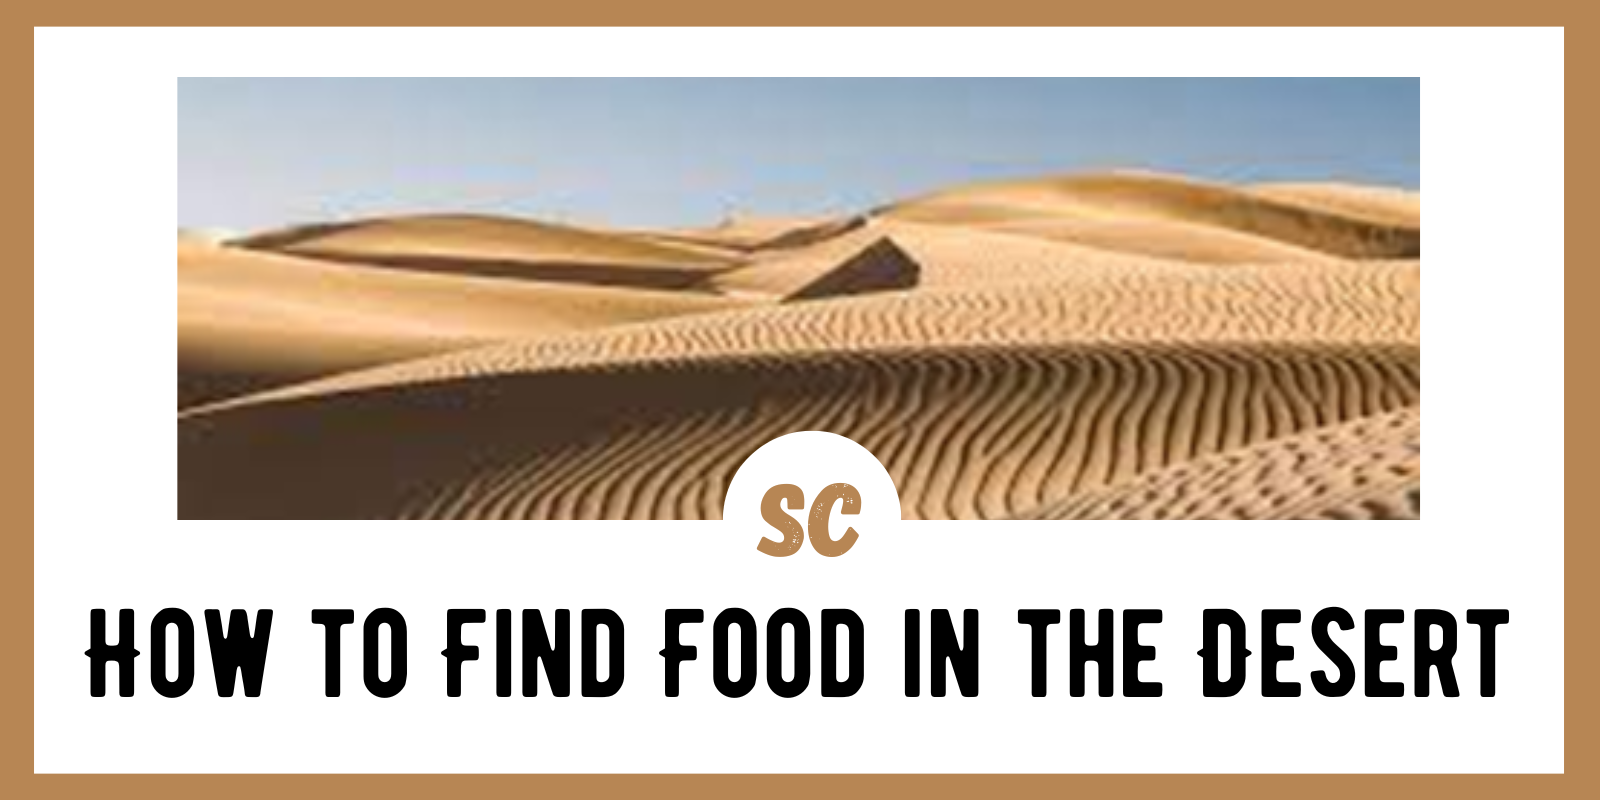 How to Find Food in the Desert